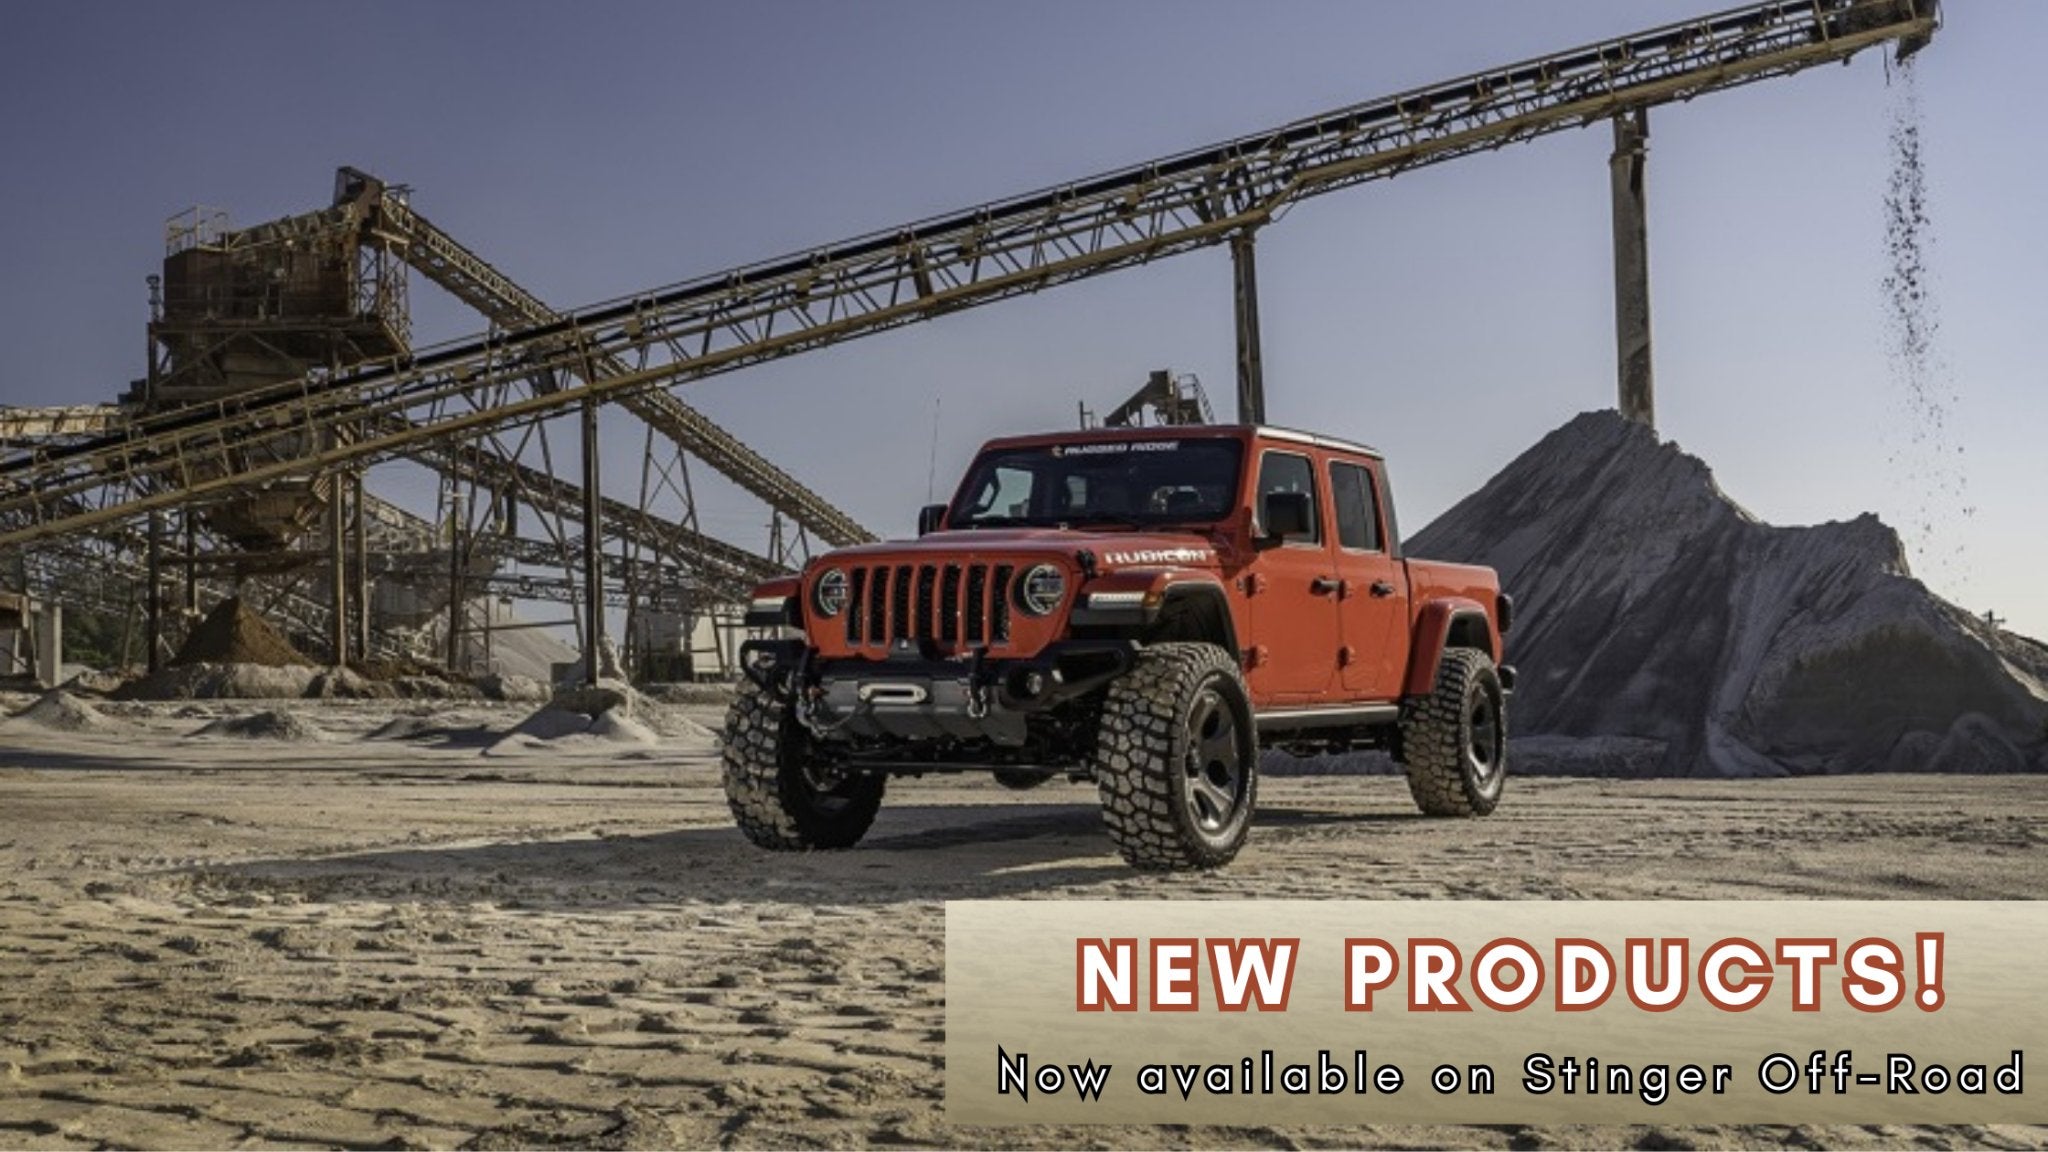 Revolutionize Your Adventures: Exciting New Product Categories Are Now Available On Stinger! - Stinger